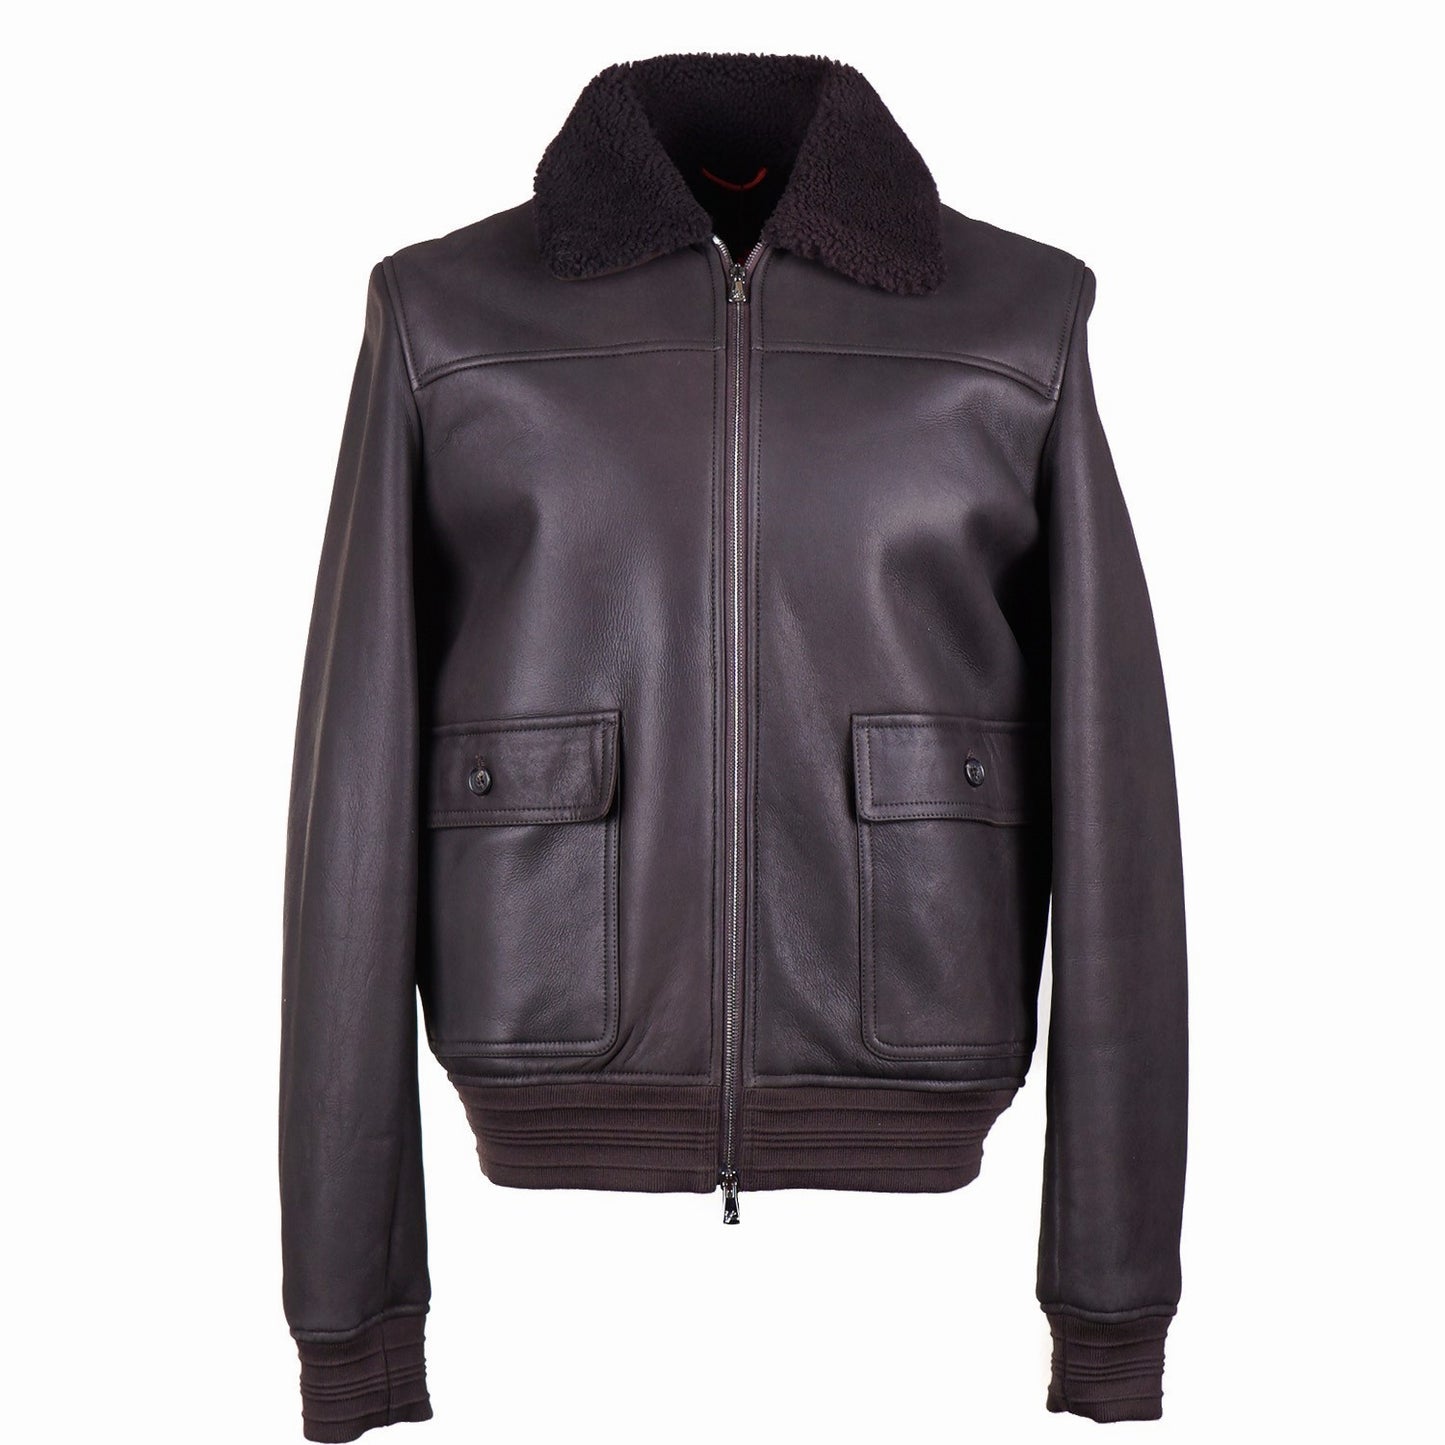 Isaia Shearling Leather Bomber Jacket - Top Shelf Apparel